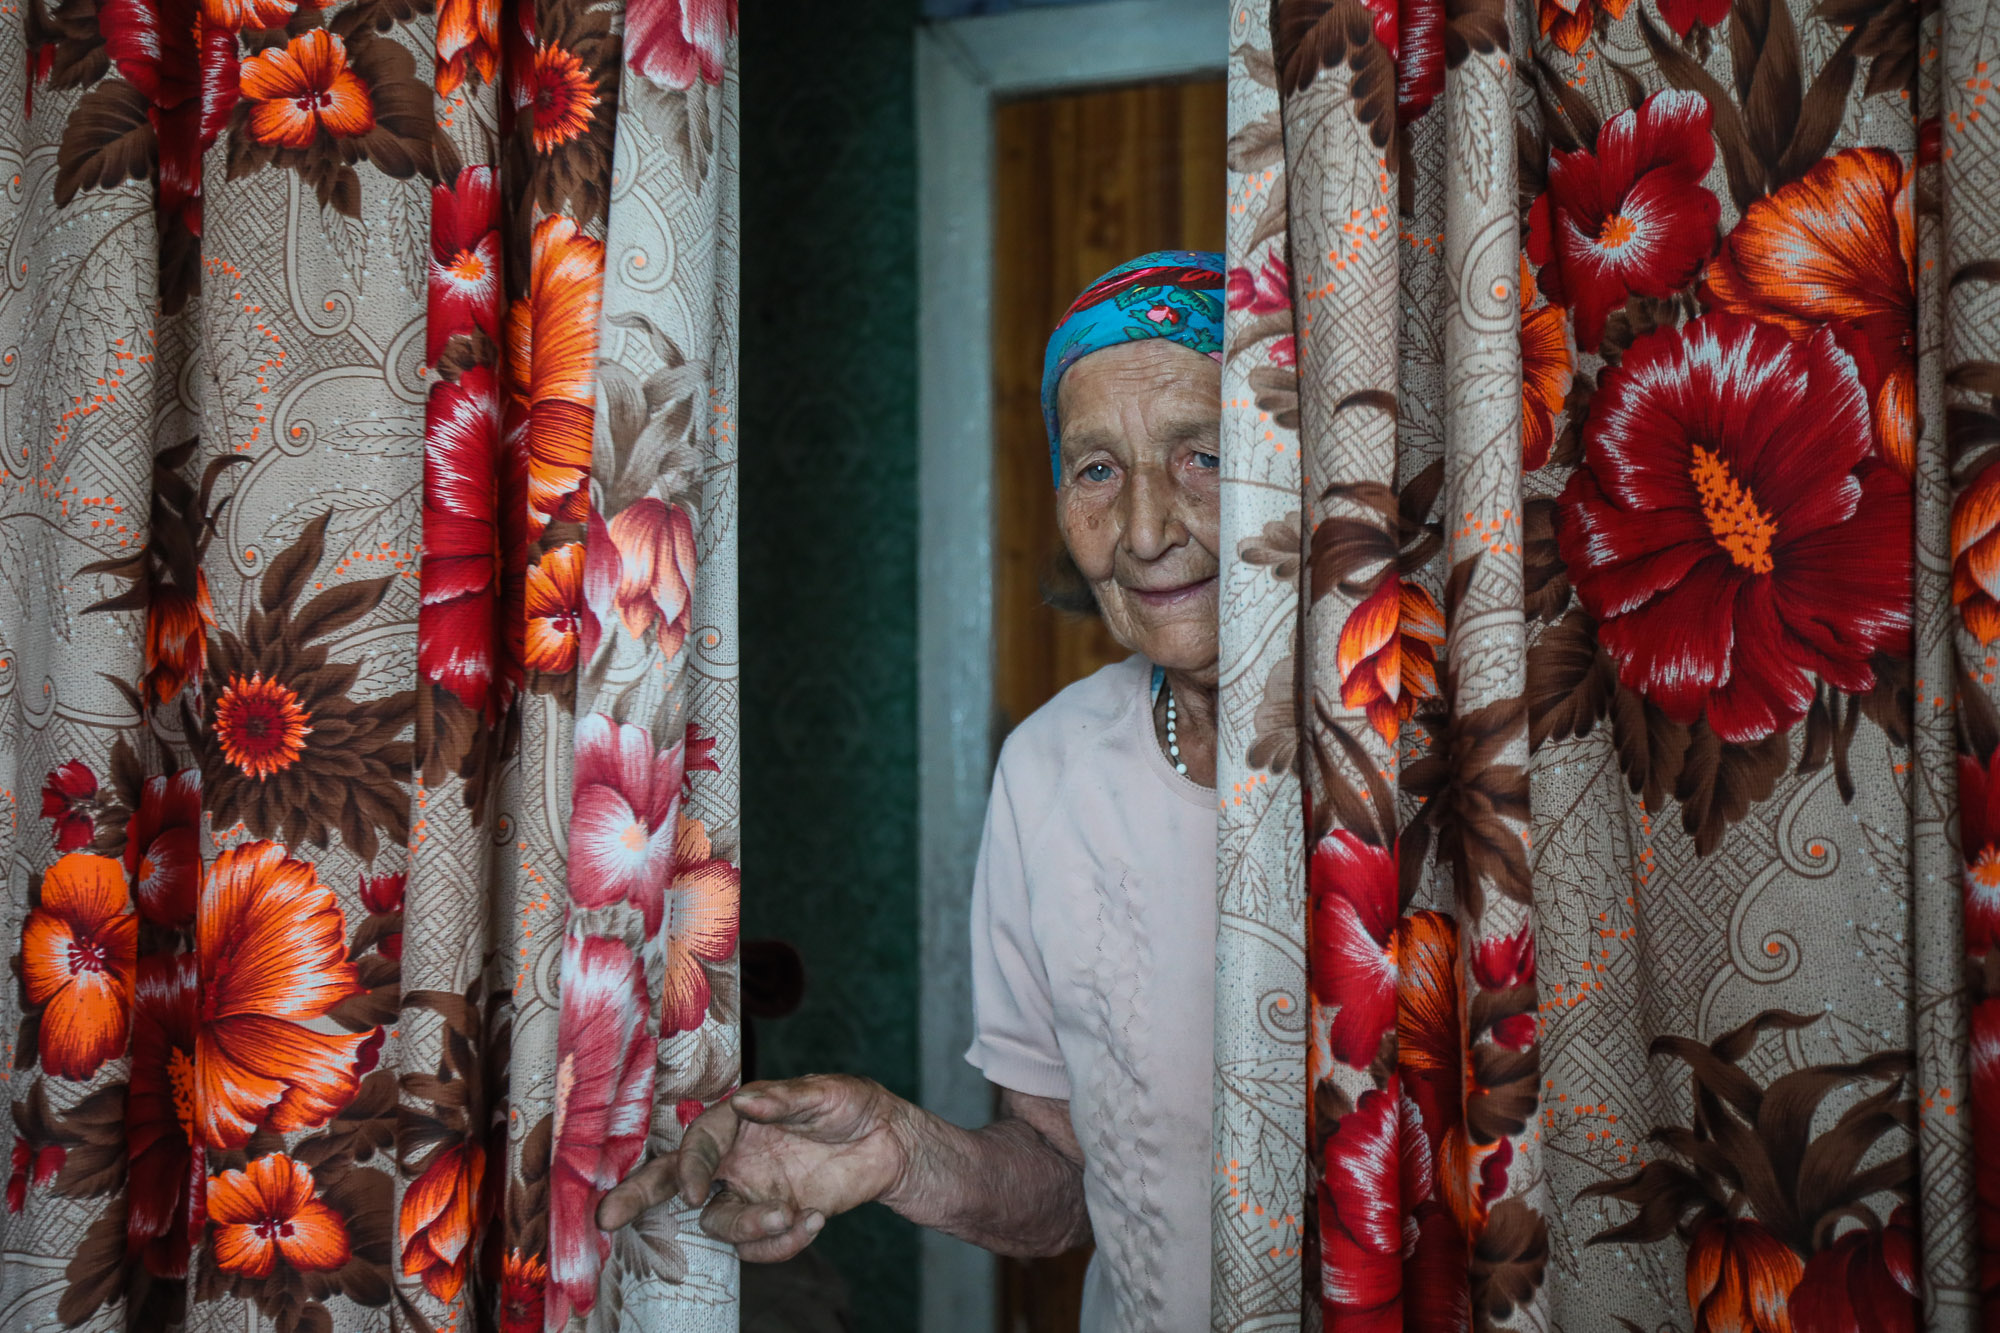 Mariya Horpynych, a elderly local civilian, looks out from behind curtains in her house in the town of Opytne, eastern Ukraine, on June 12, 2019.